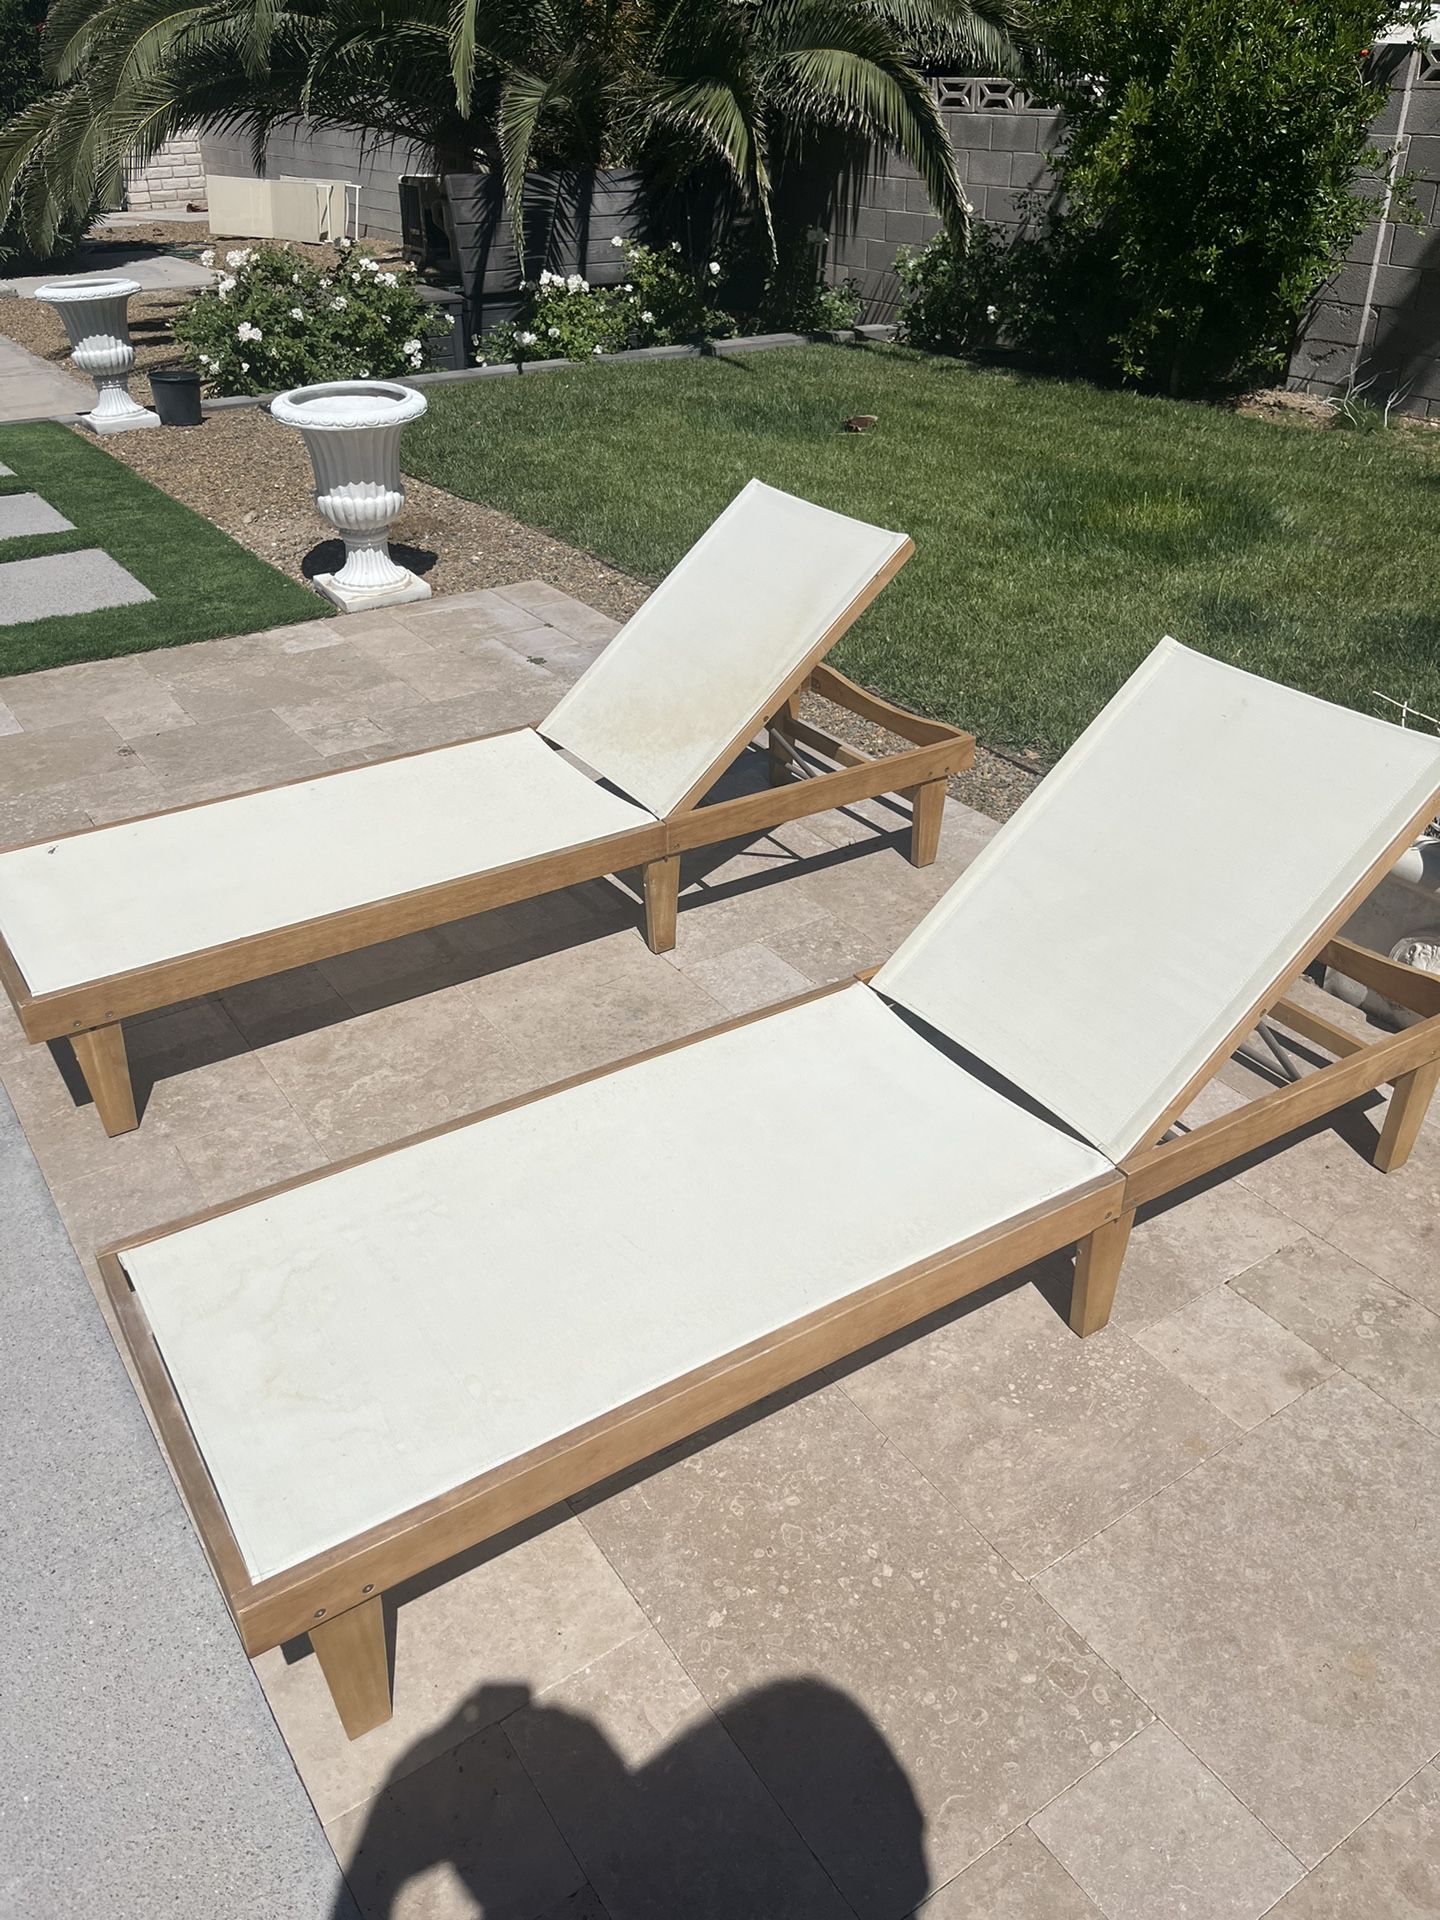 4 Pool Loungers - Outdoor Furniture